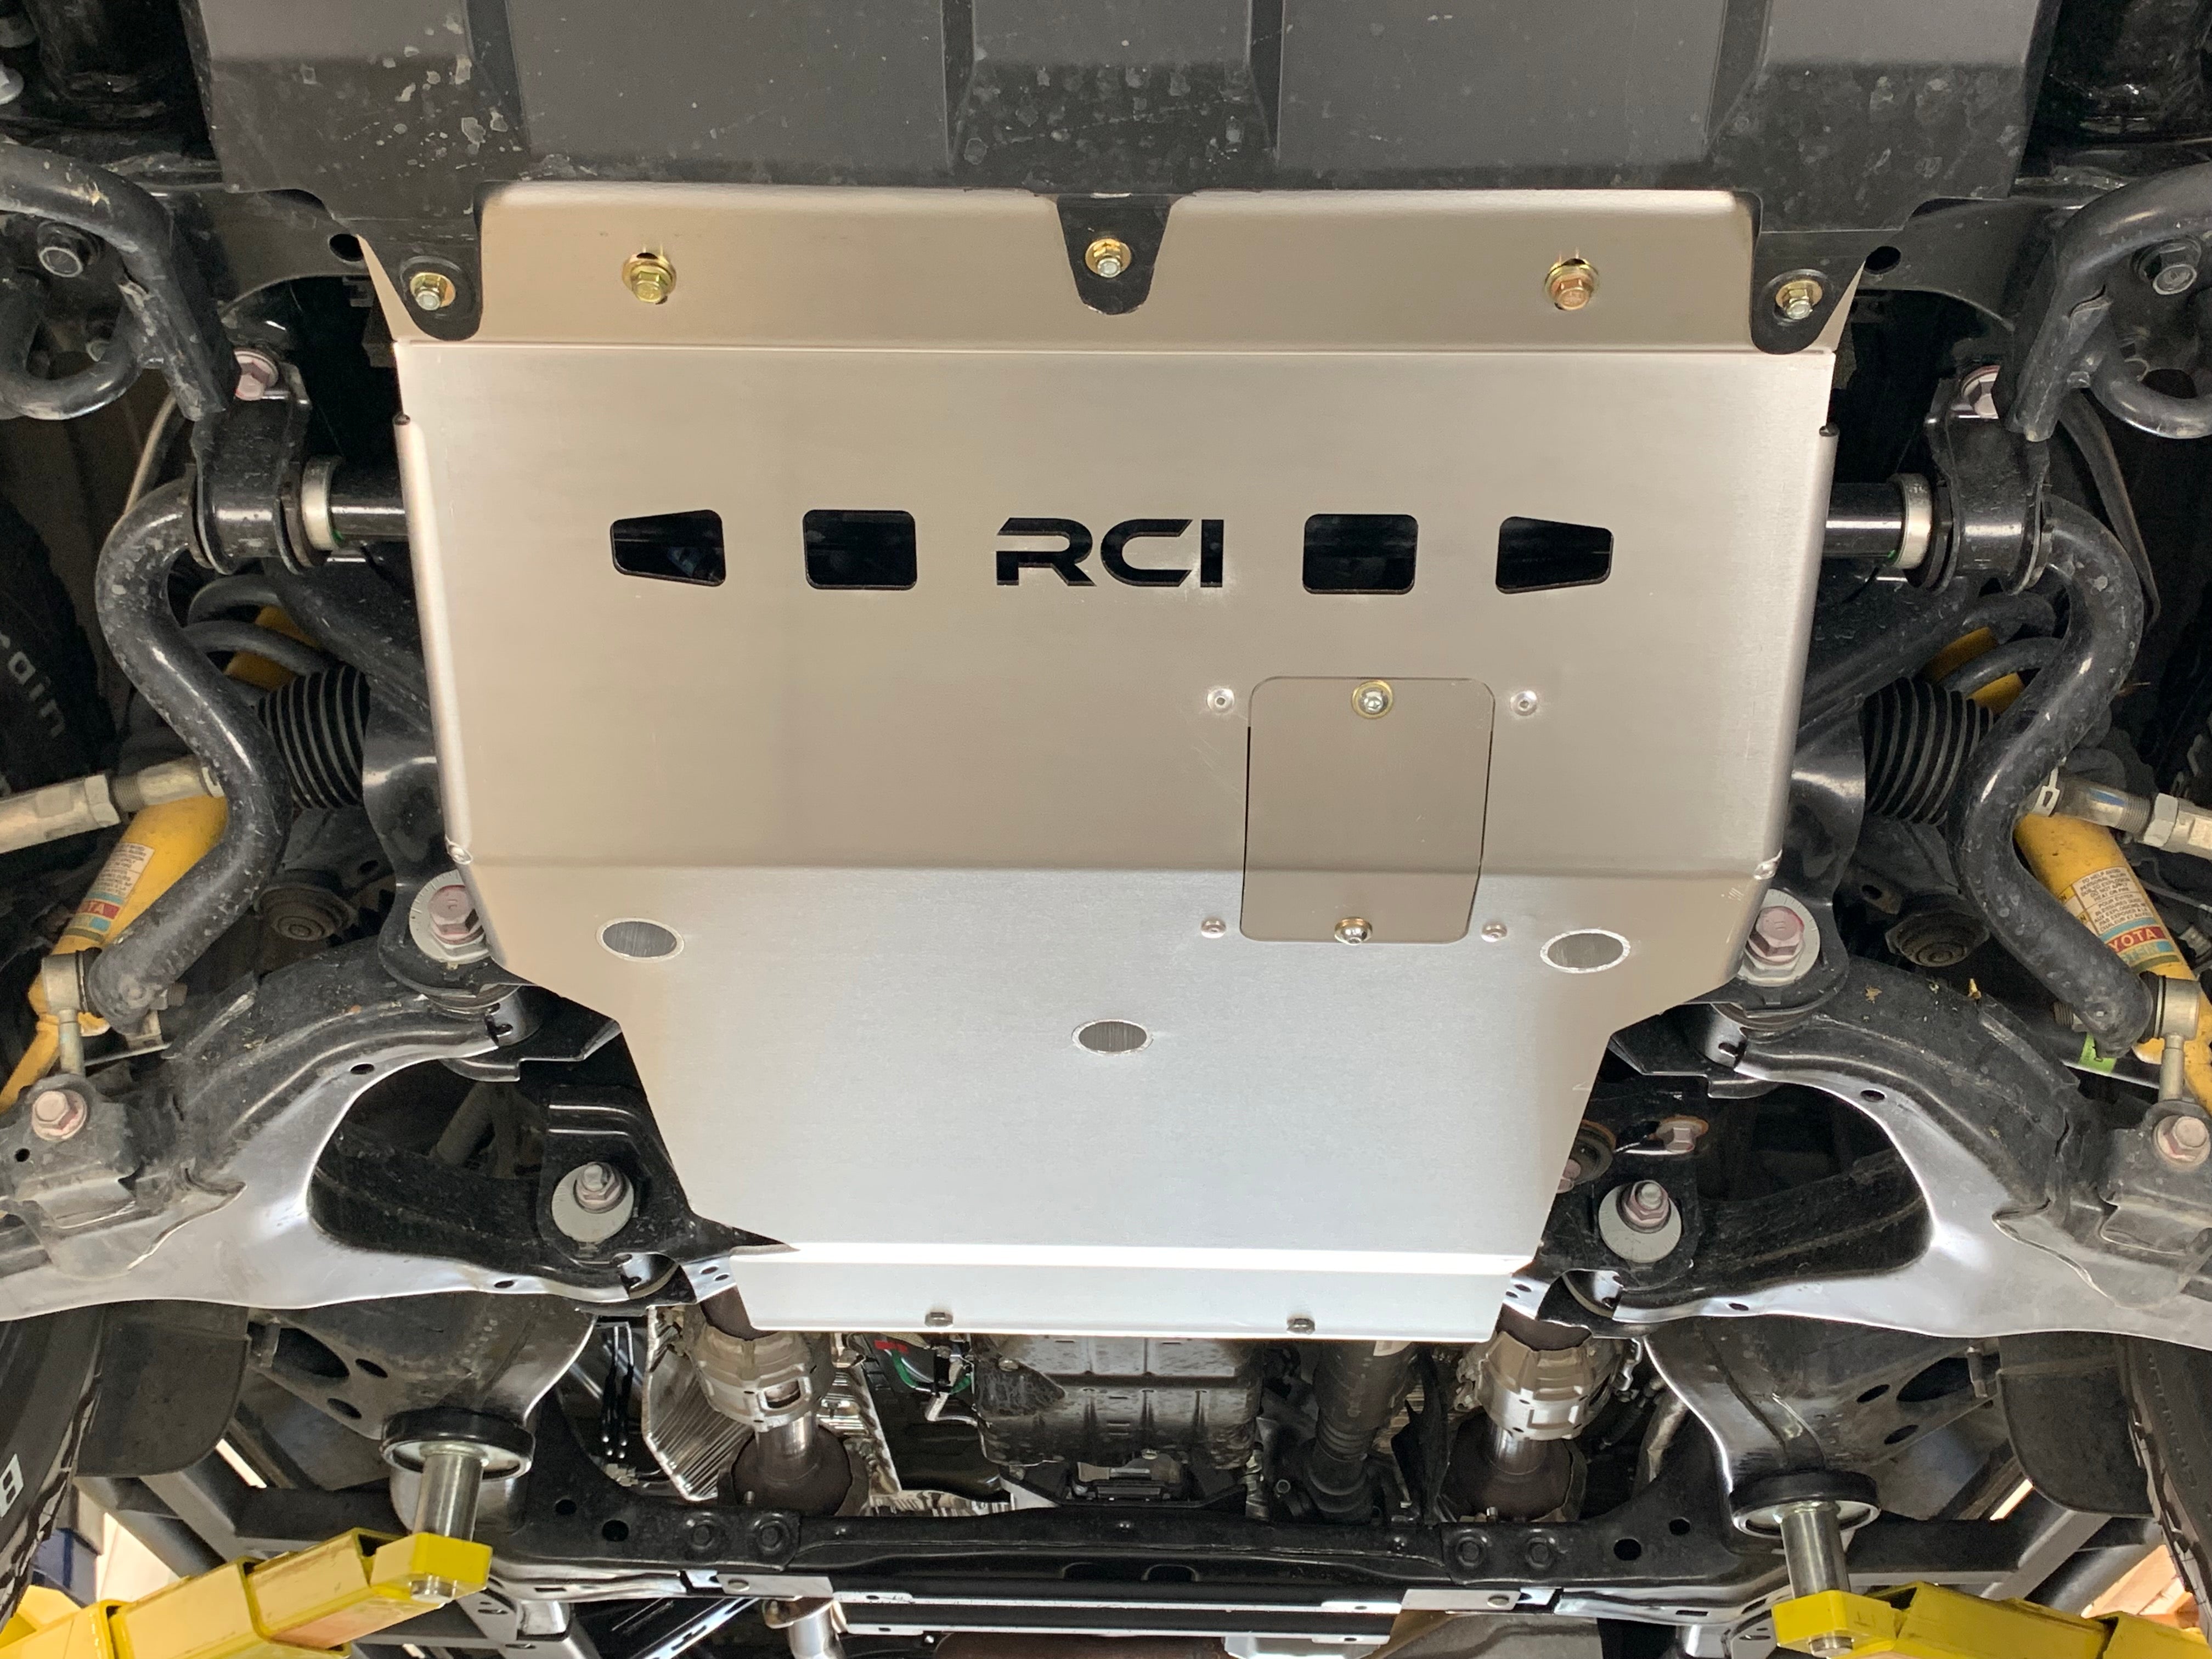 '22-23  Toyota Tundra RCI Off-Road Skid Plate Package (bottom view)